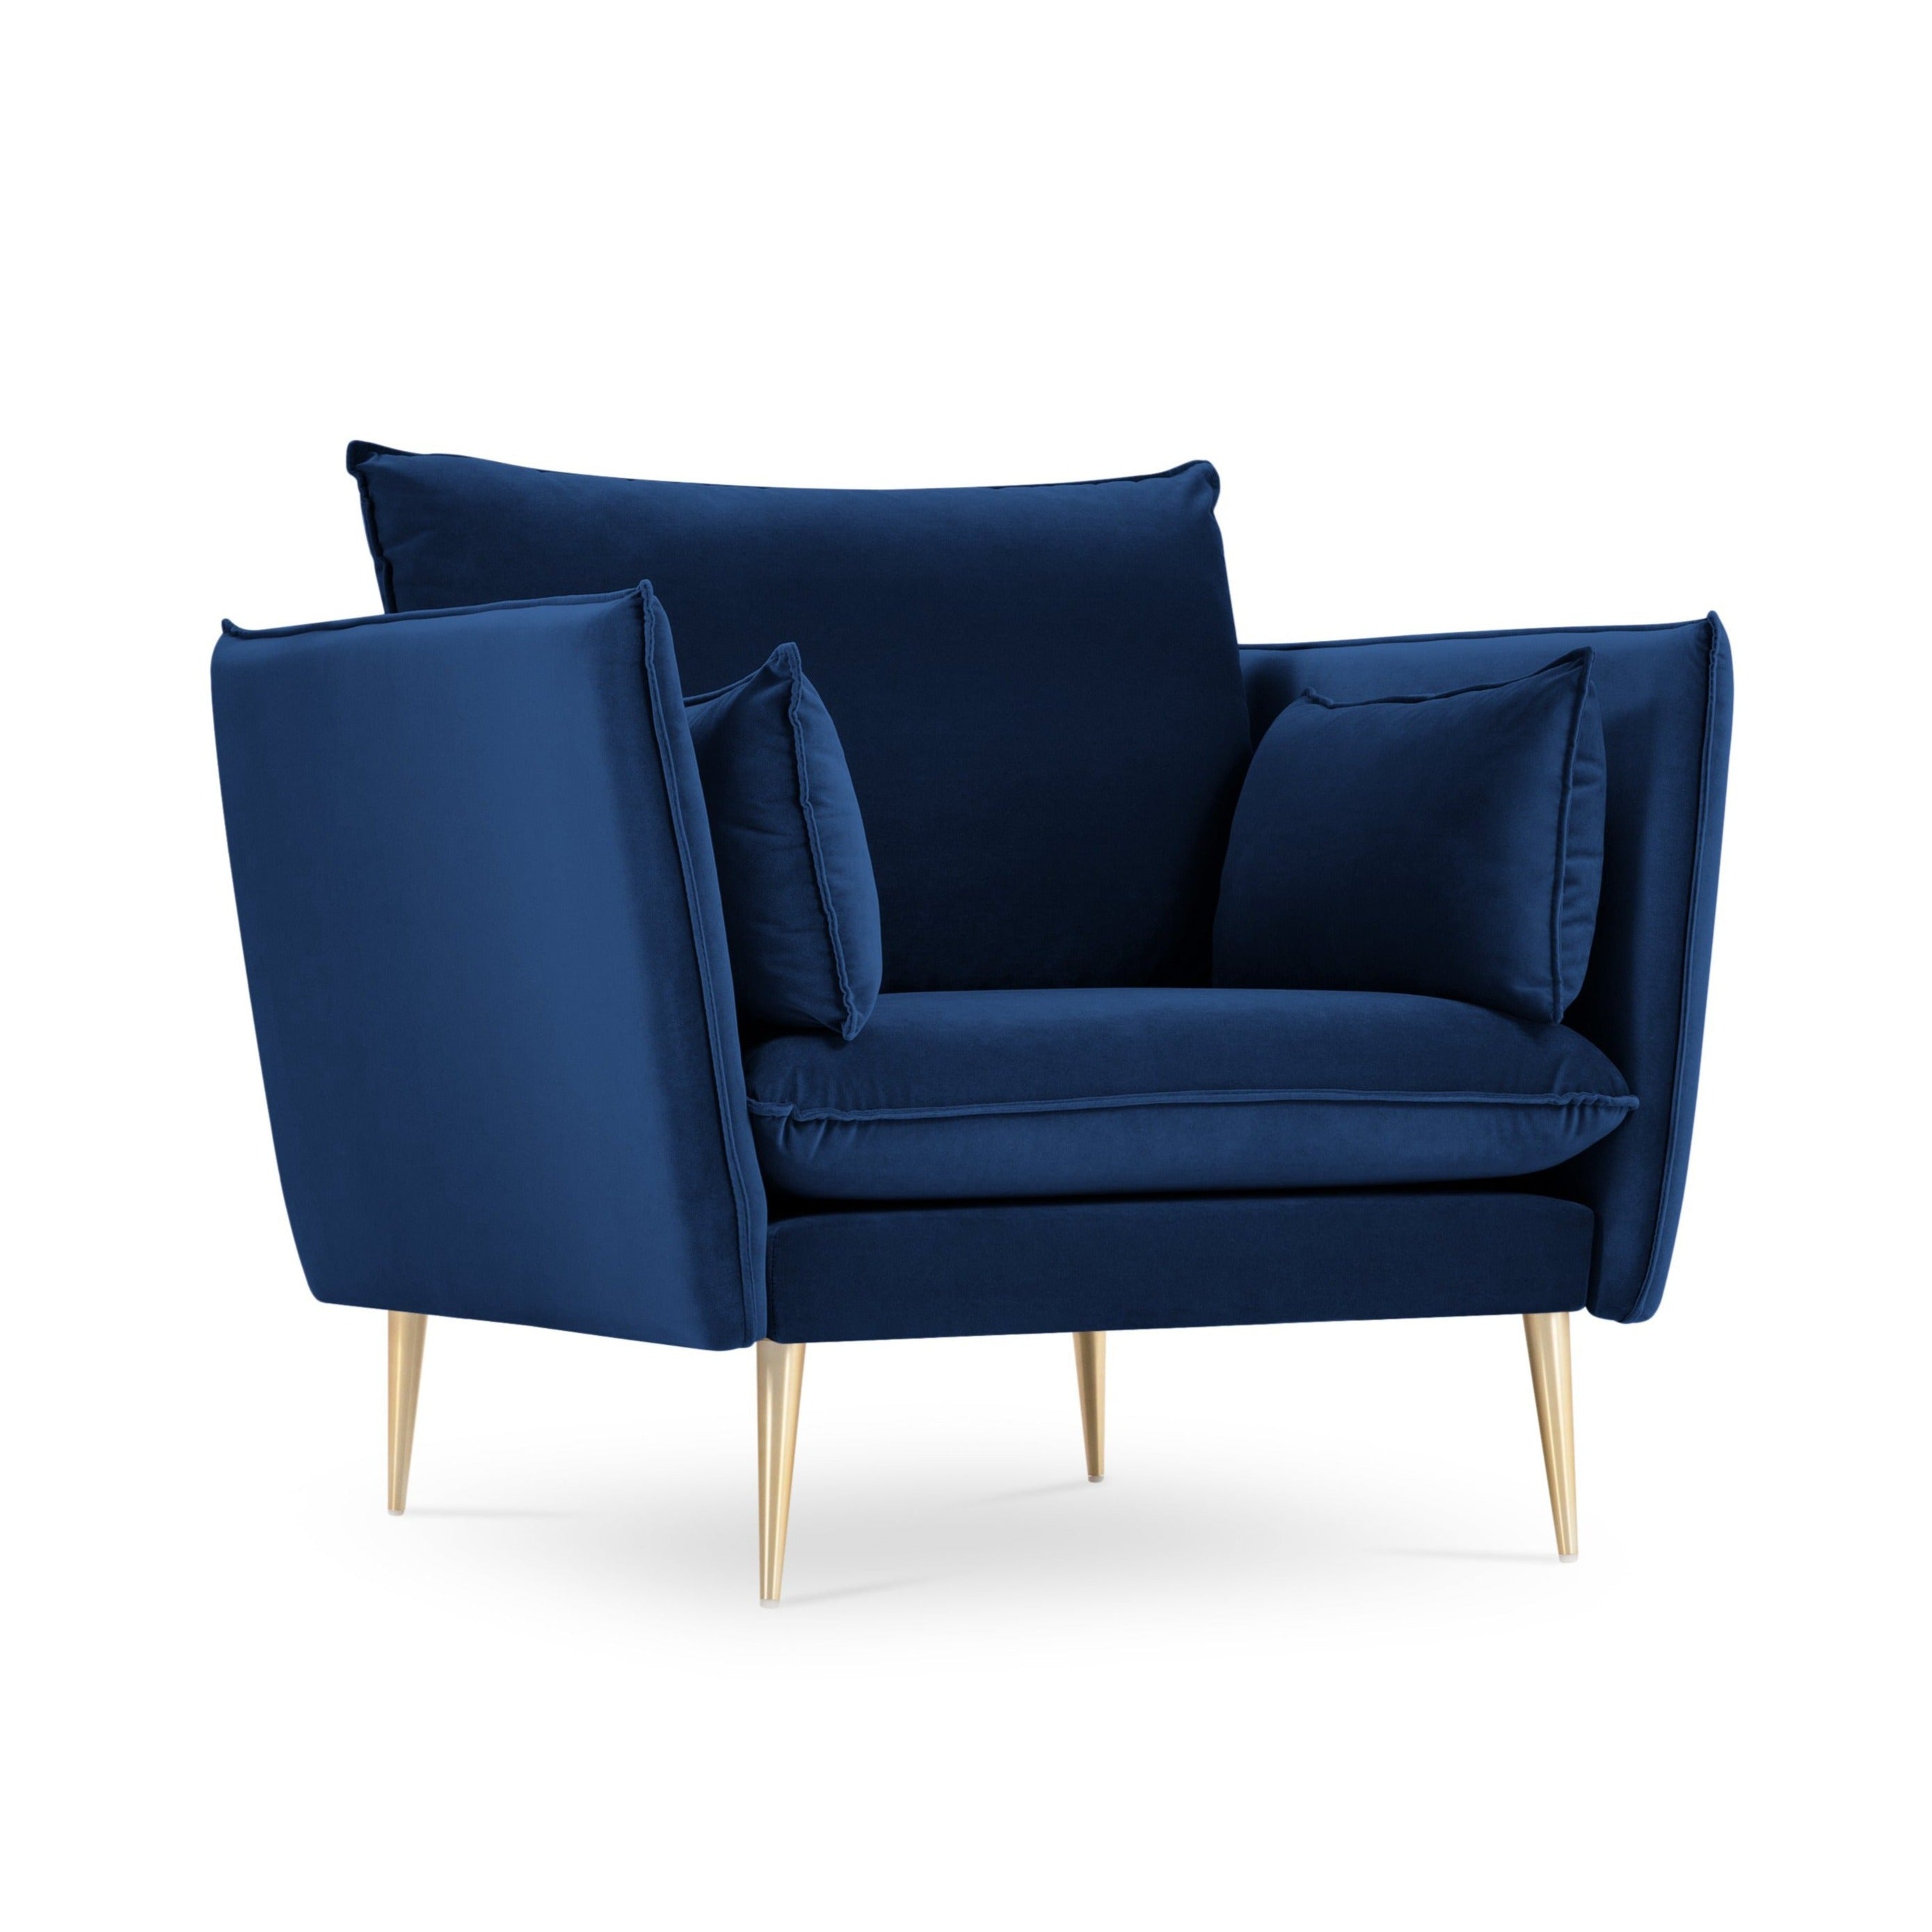 Blue armchair with a golden base